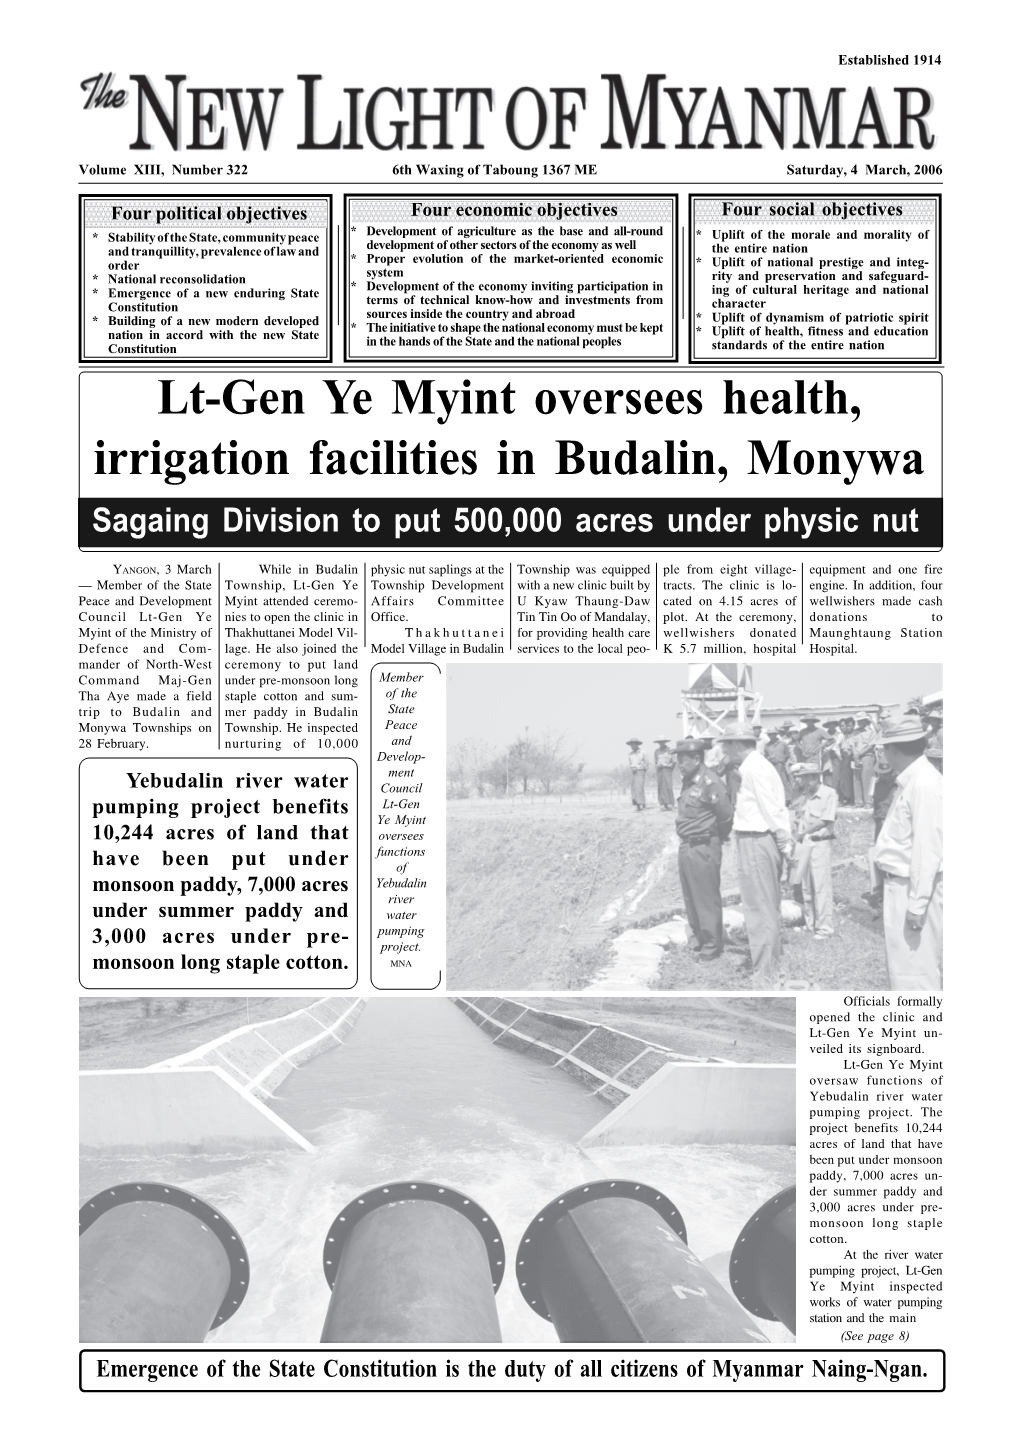 Lt-Gen Ye Myint Oversees Health, Irrigation Facilities in Budalin, Monywa Sagaing Division to Put 500,000 Acres Under Physic Nut